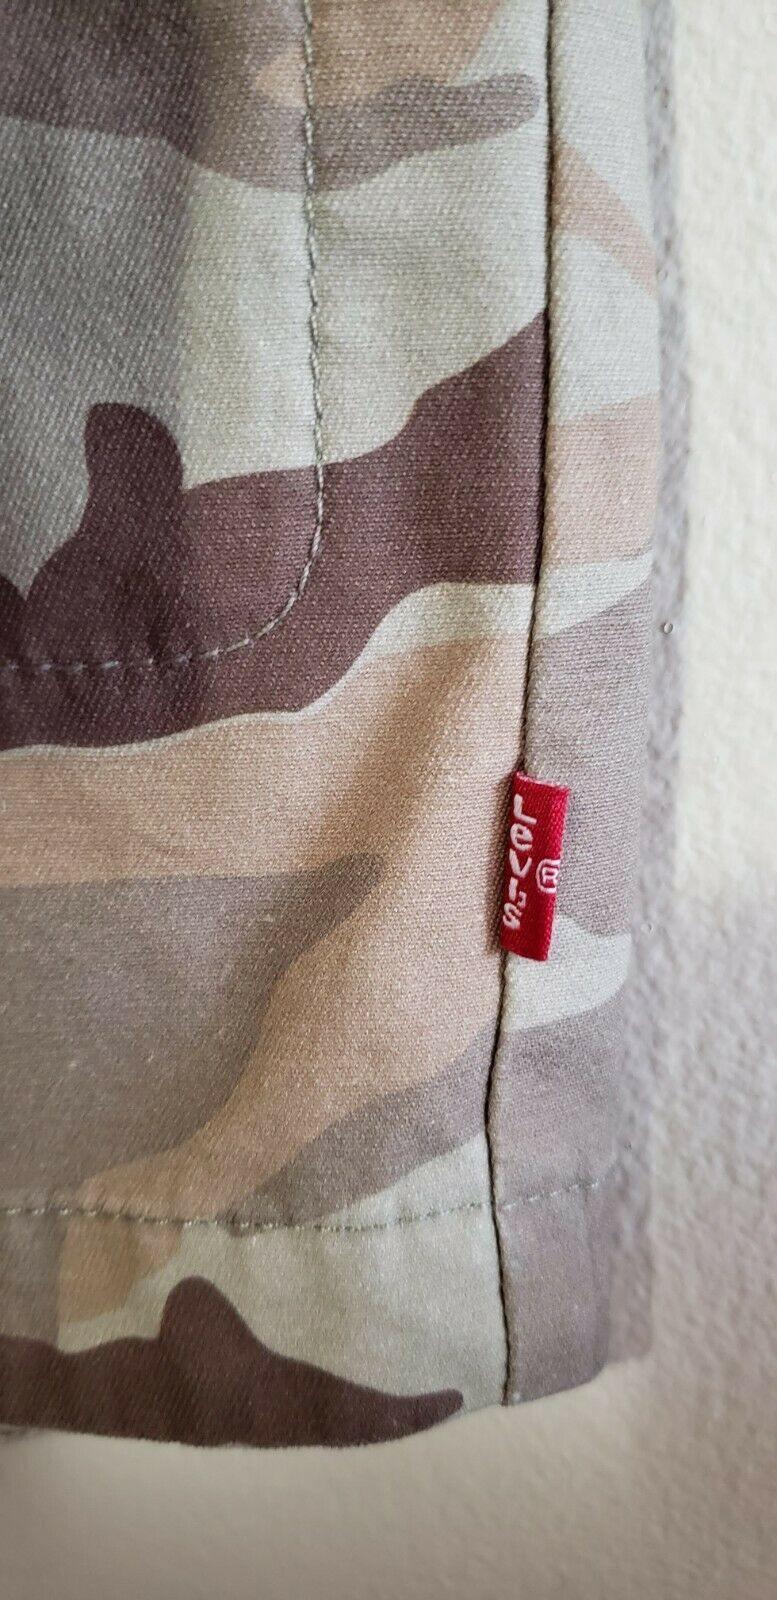 Levi's Womens Military Camo Hooded Jacket Light Weight Parka Size M - SVNYFancy